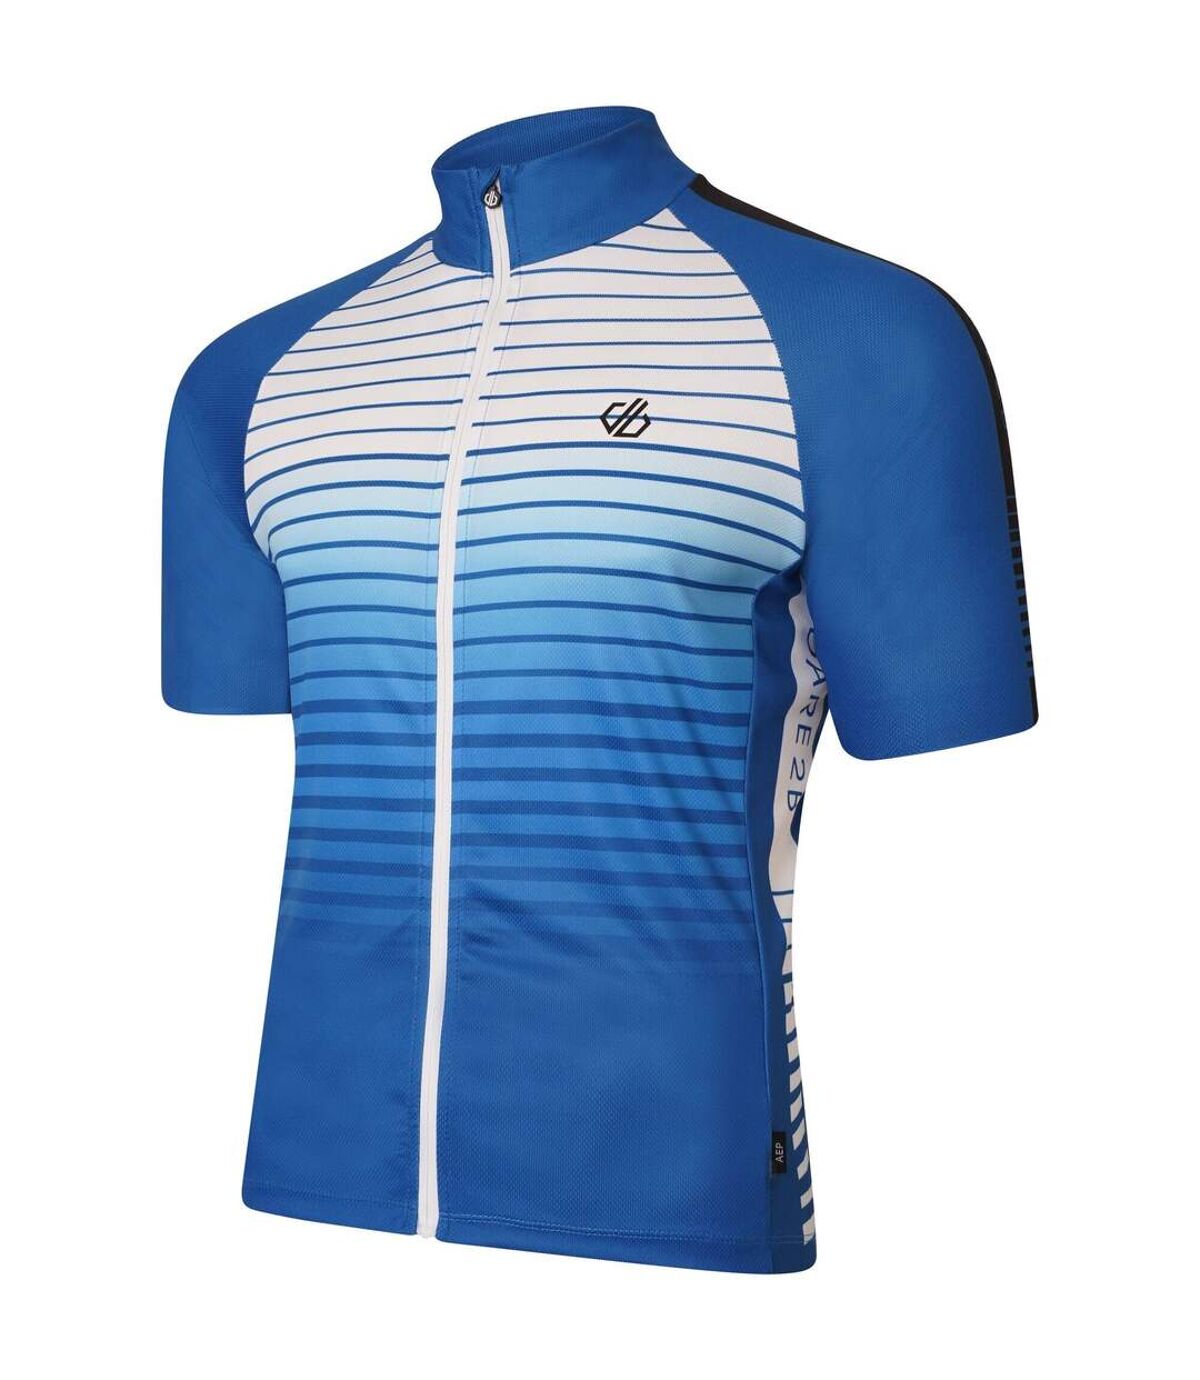 Dare 2B Mens Virtuous AEP Cycling Jersey (Snorkel Blue) - UTRG7233